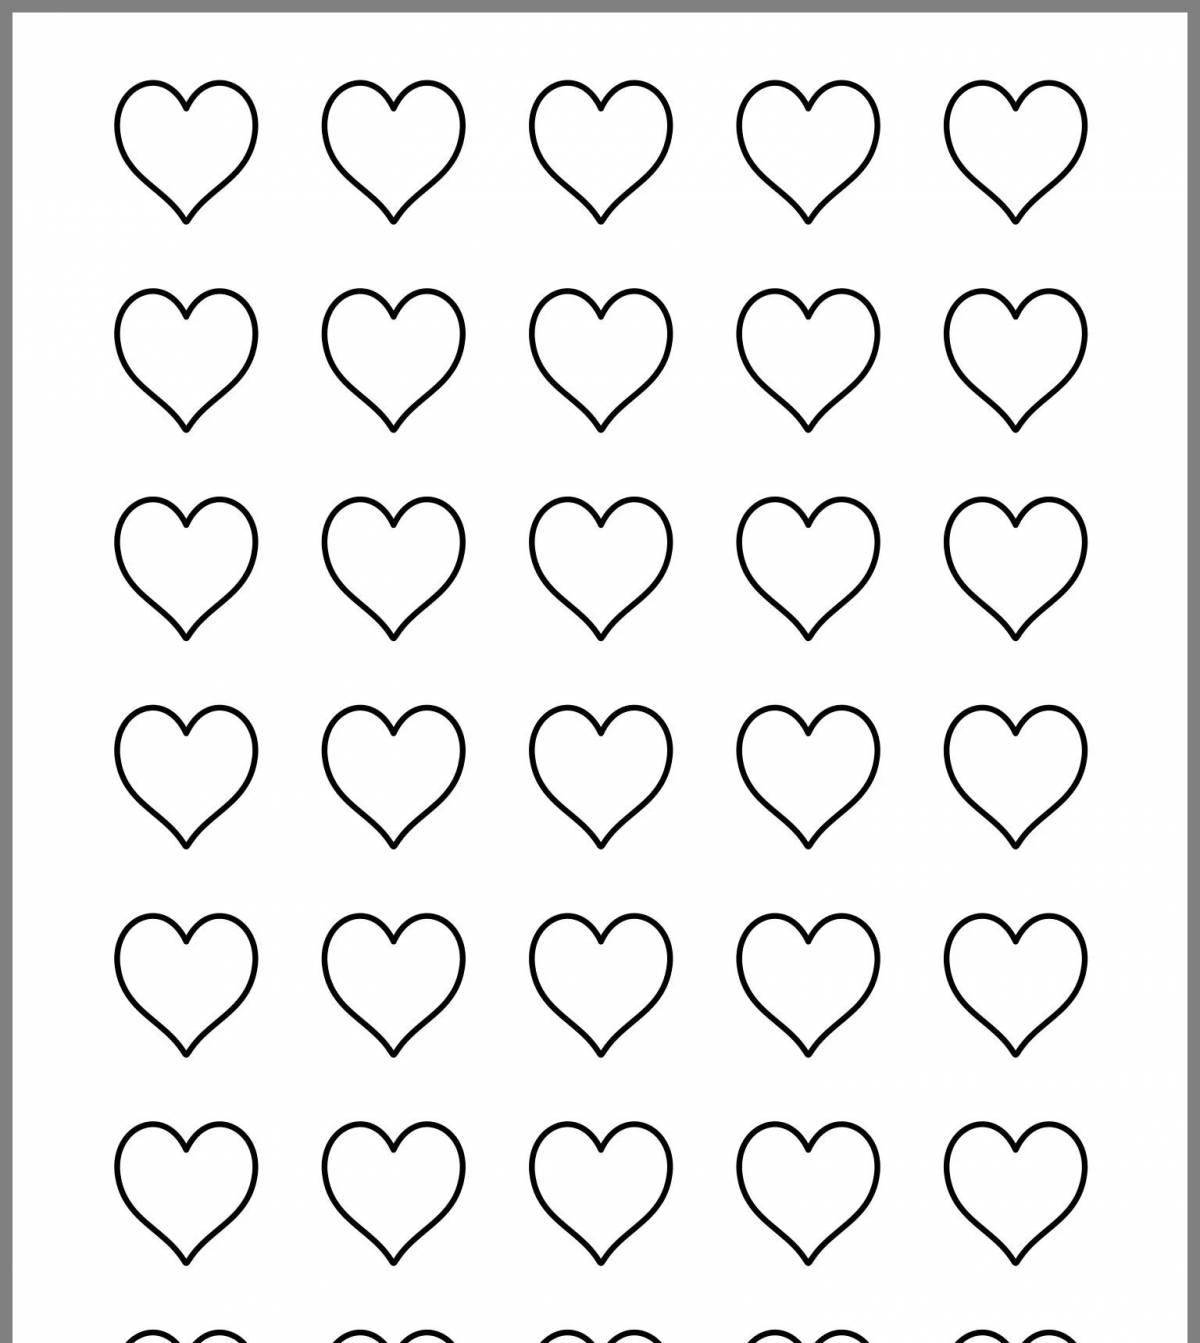 Glamorous hearts coloring book